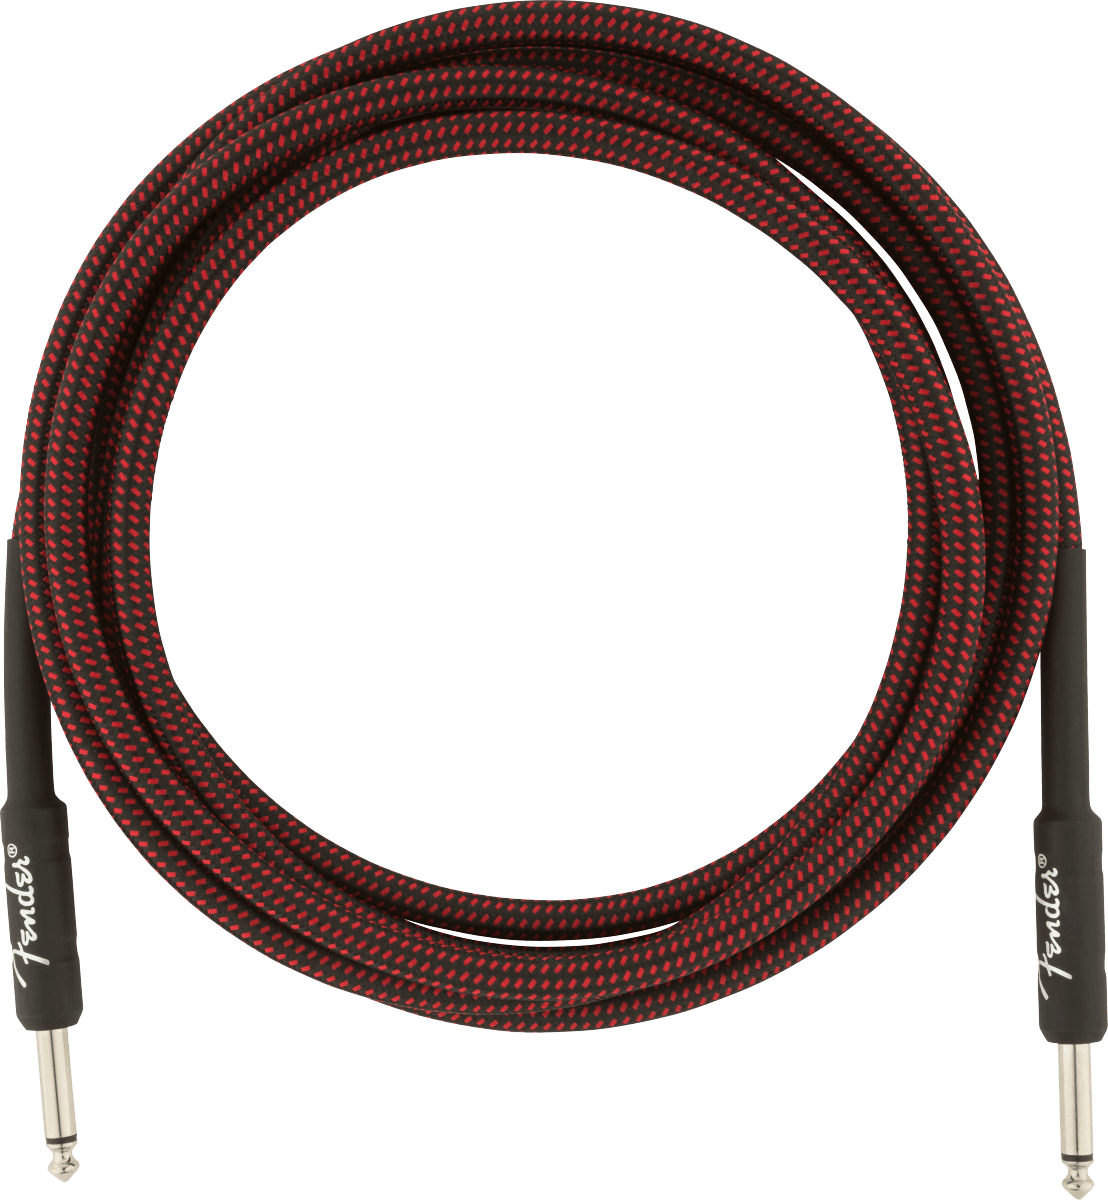 Professional Series Instrument Cables 10 Red Tweed - Muso's Stuff